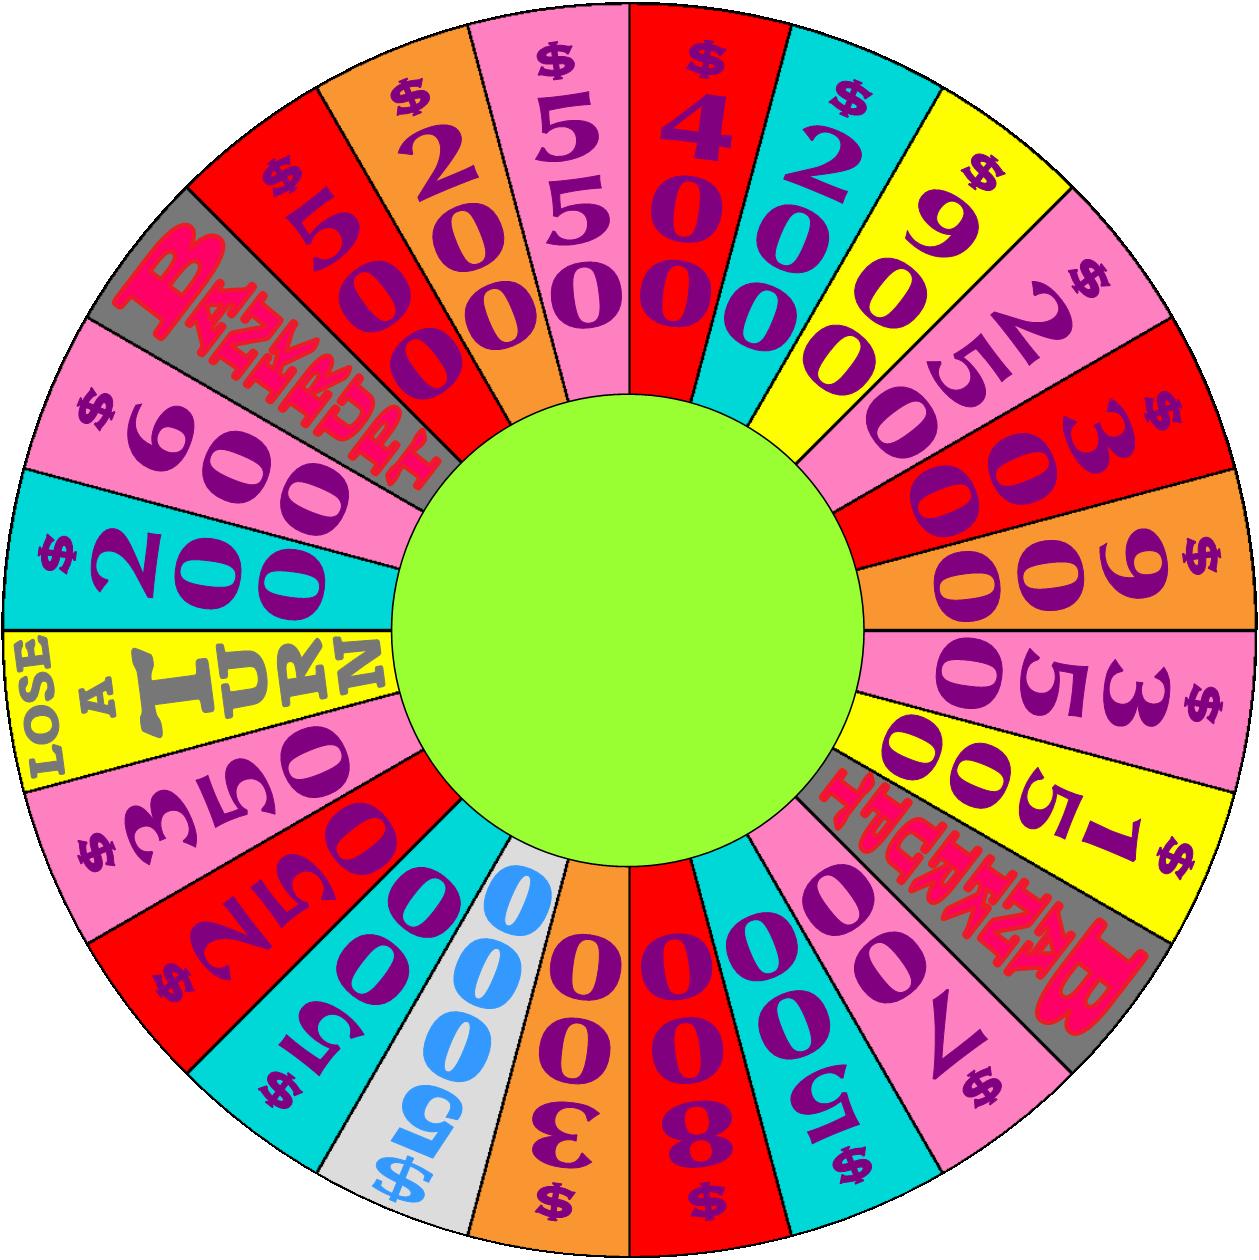 Brite Wheel of Fortune 3 by germanname